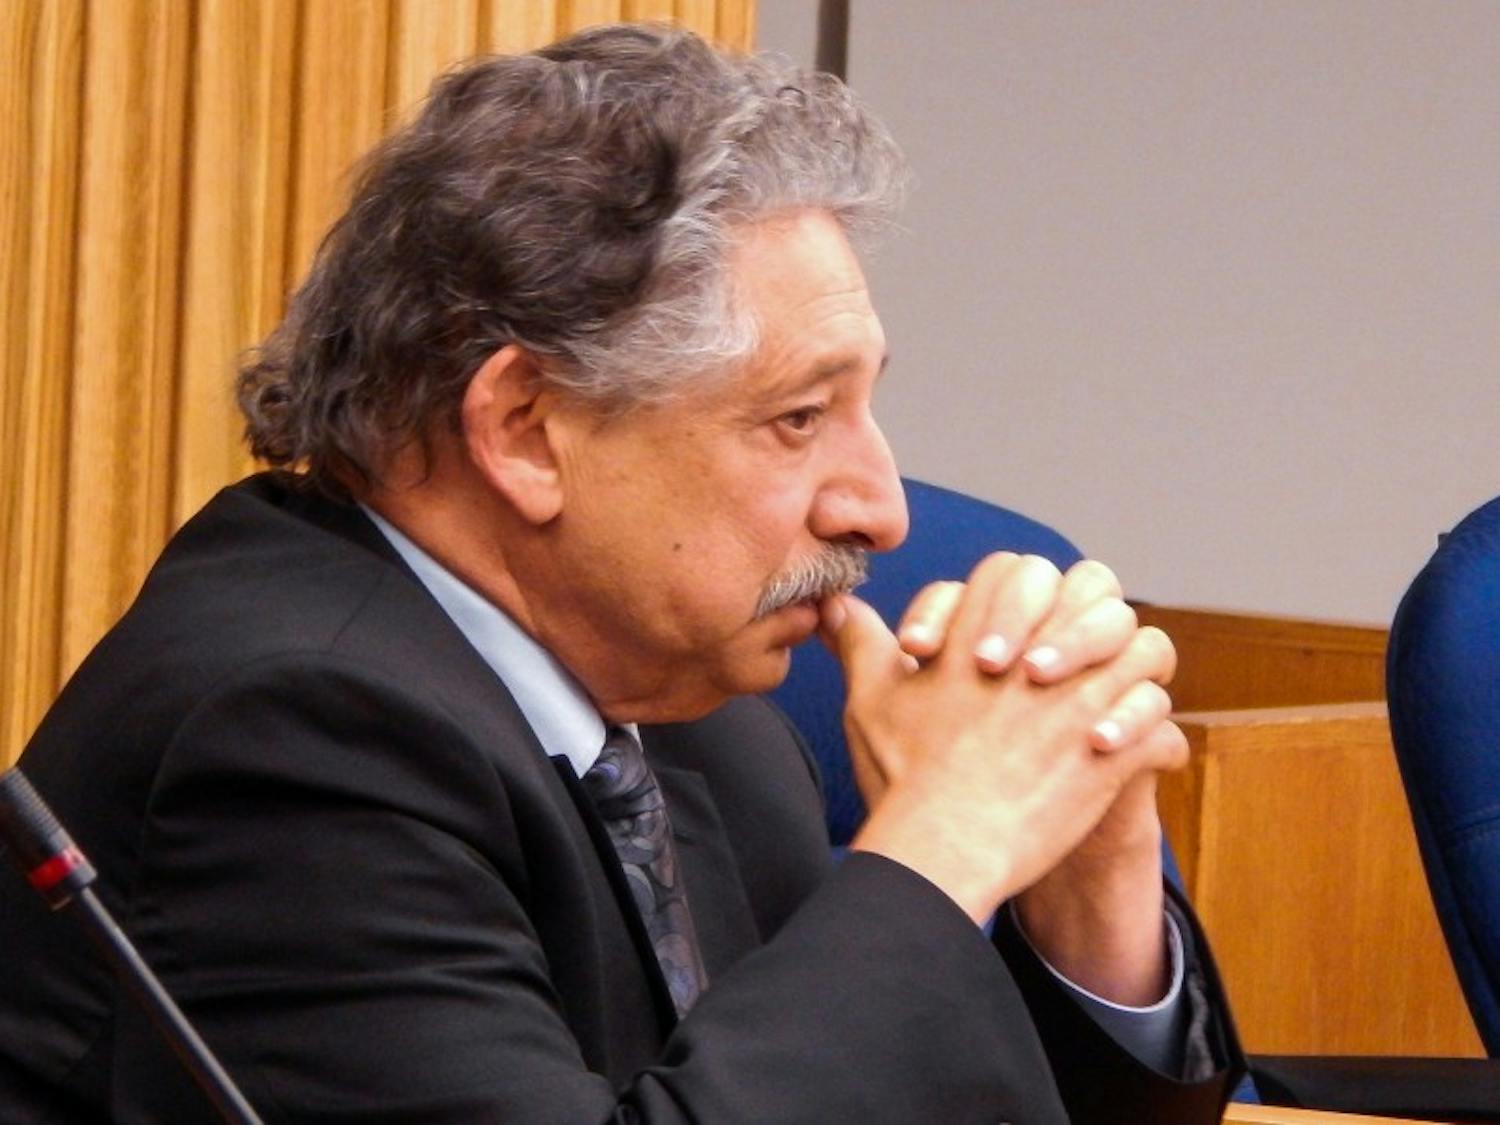 Mayor Paul Soglin said Tuesday that the proposal to cut funding for Wisconsin’s Farm to School program is a “fake austerity measure.”